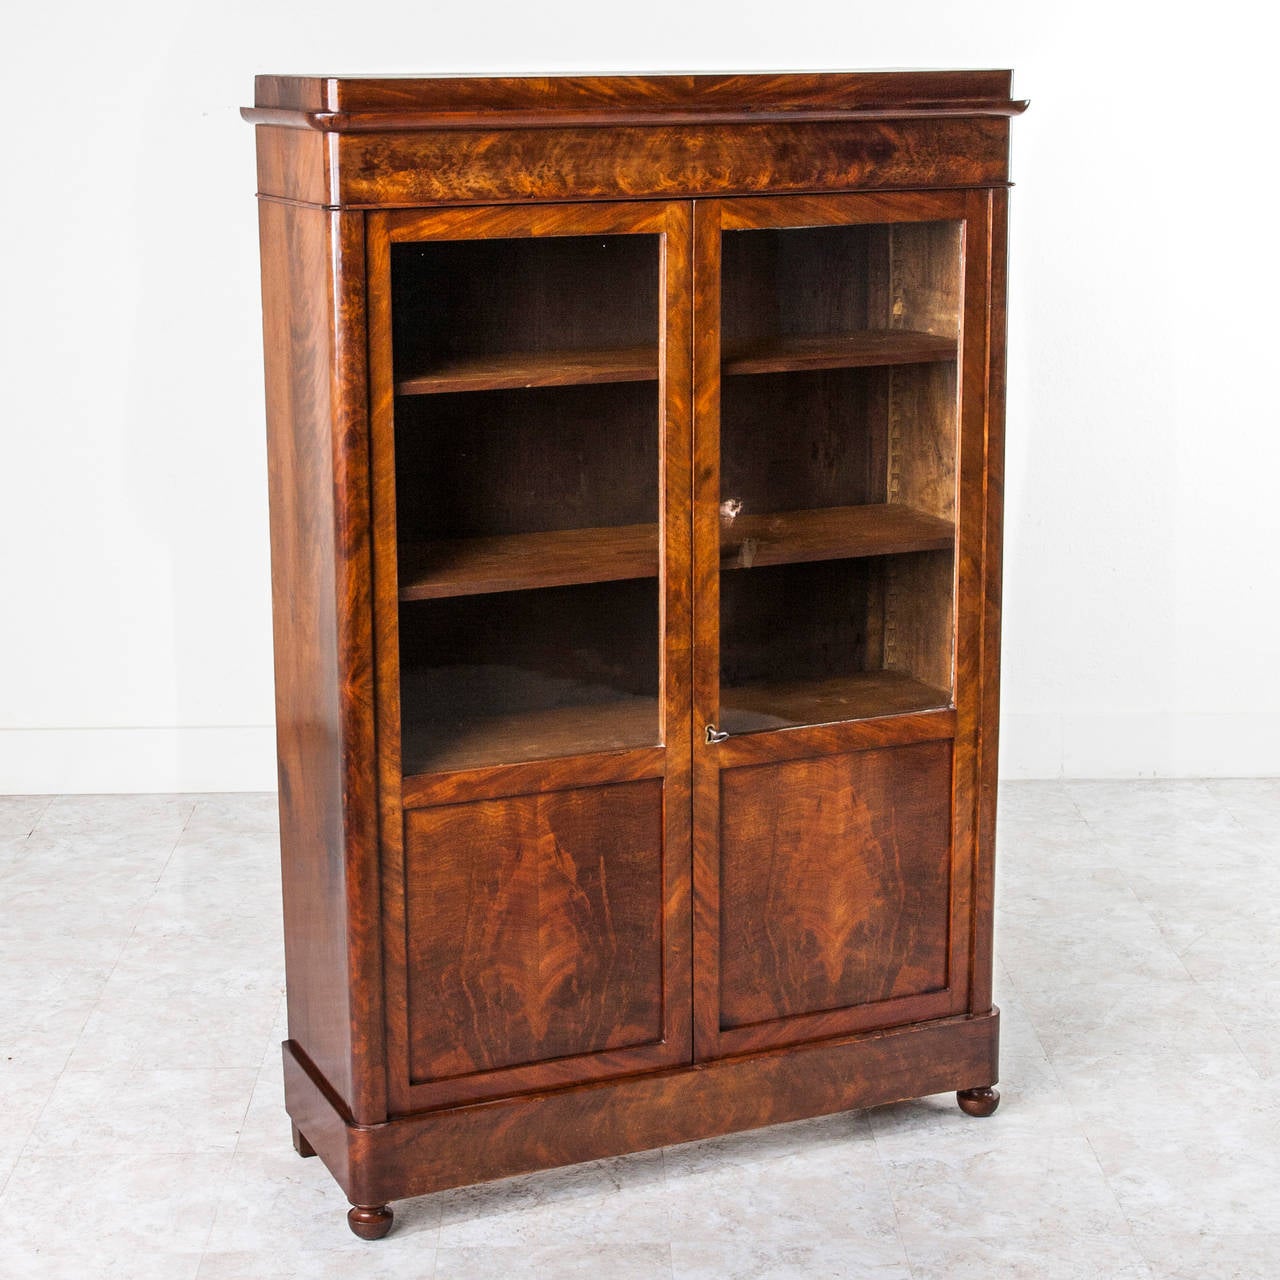 18th Century Period Louis Philippe Flamed Mahogany Bookcase or Vitrine Cabinet